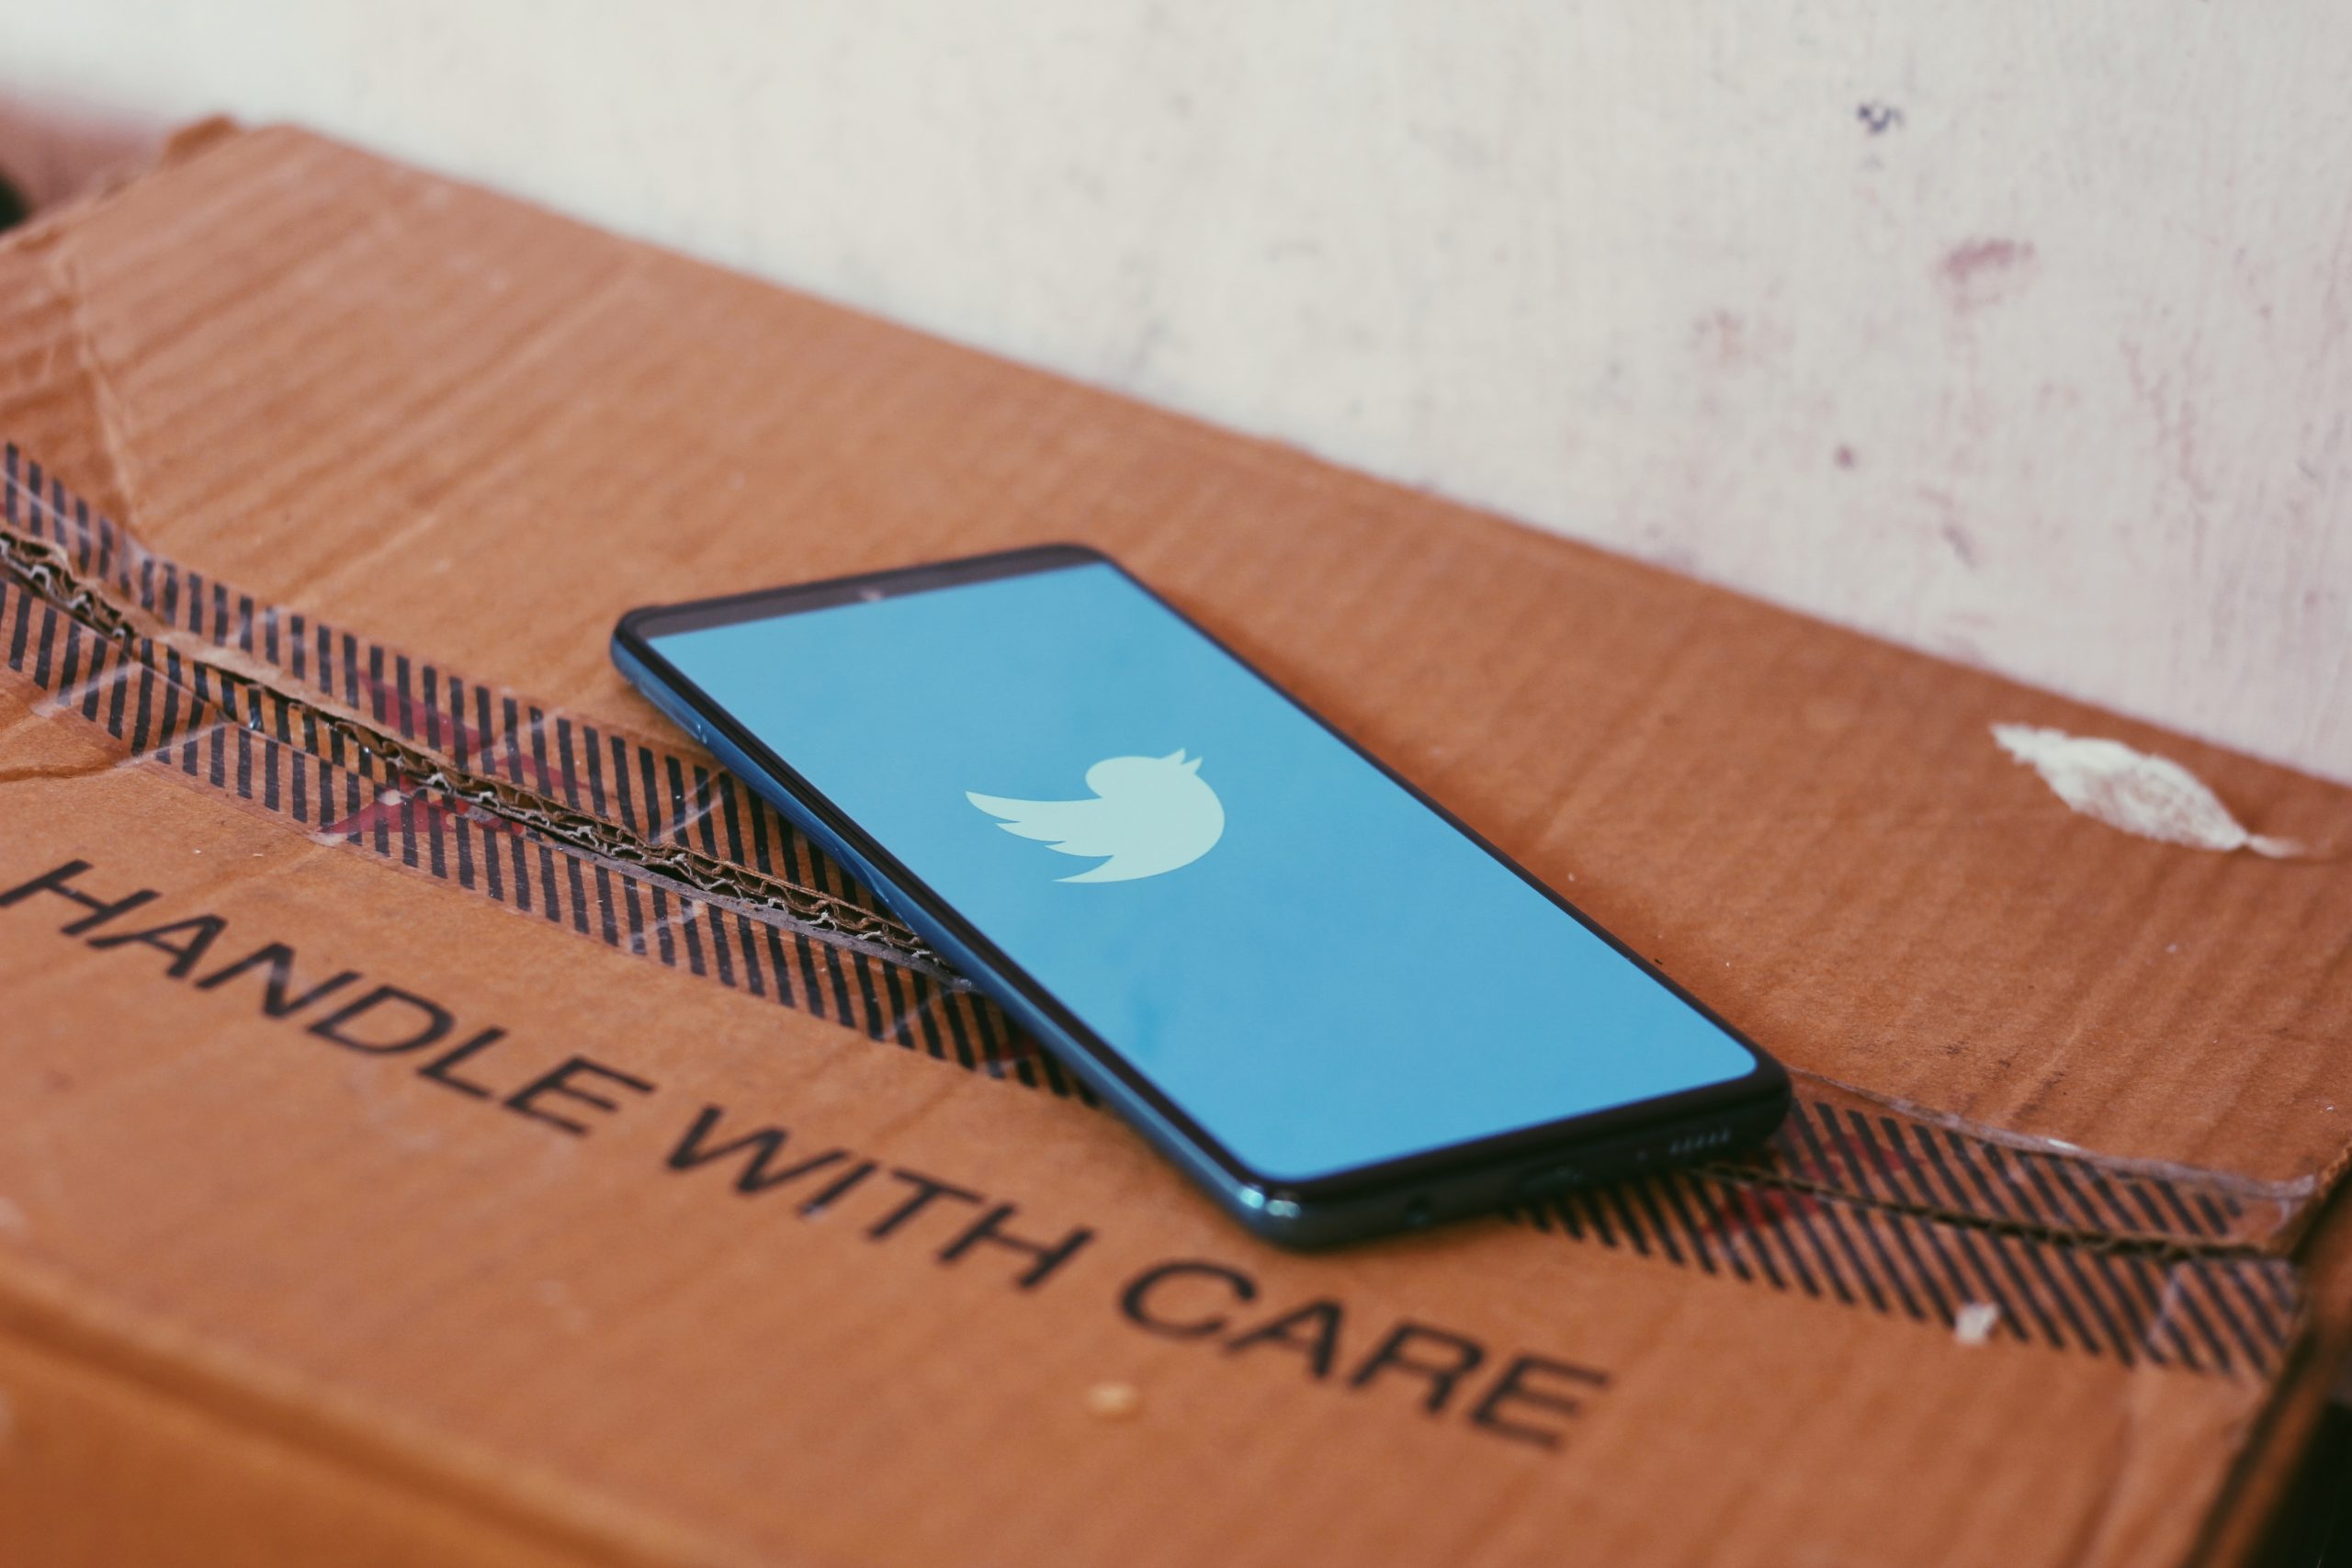 Mobile phone on box displaying the Twitter logo.